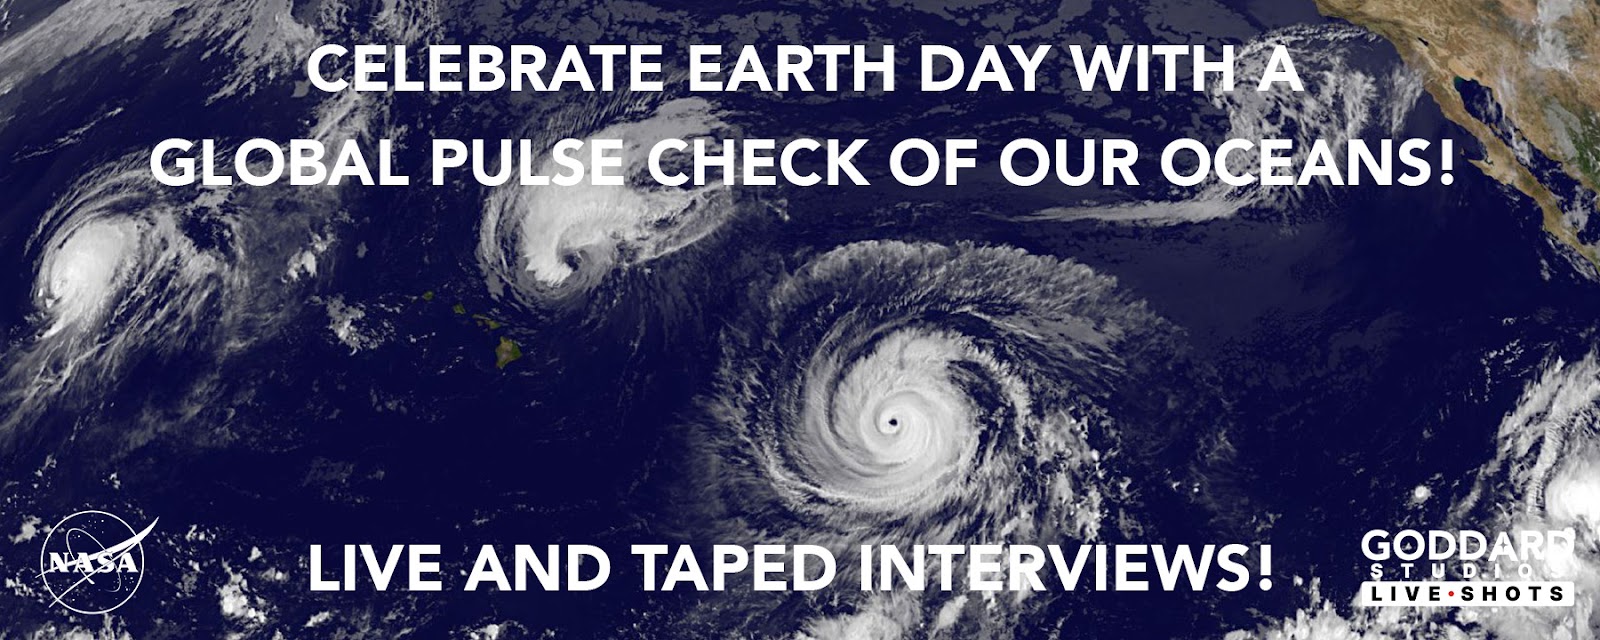 Associated cut b-roll for the live shtos and pre-recorded soundbites will be added by 5 p.m. EST on Friday, April 19.Click on links below for latest stories:The Ocean Touches Everything: Celebrate Earth Day with NASANASA’s PACE Data on Ocean, Atmosphere, Climate Now Available